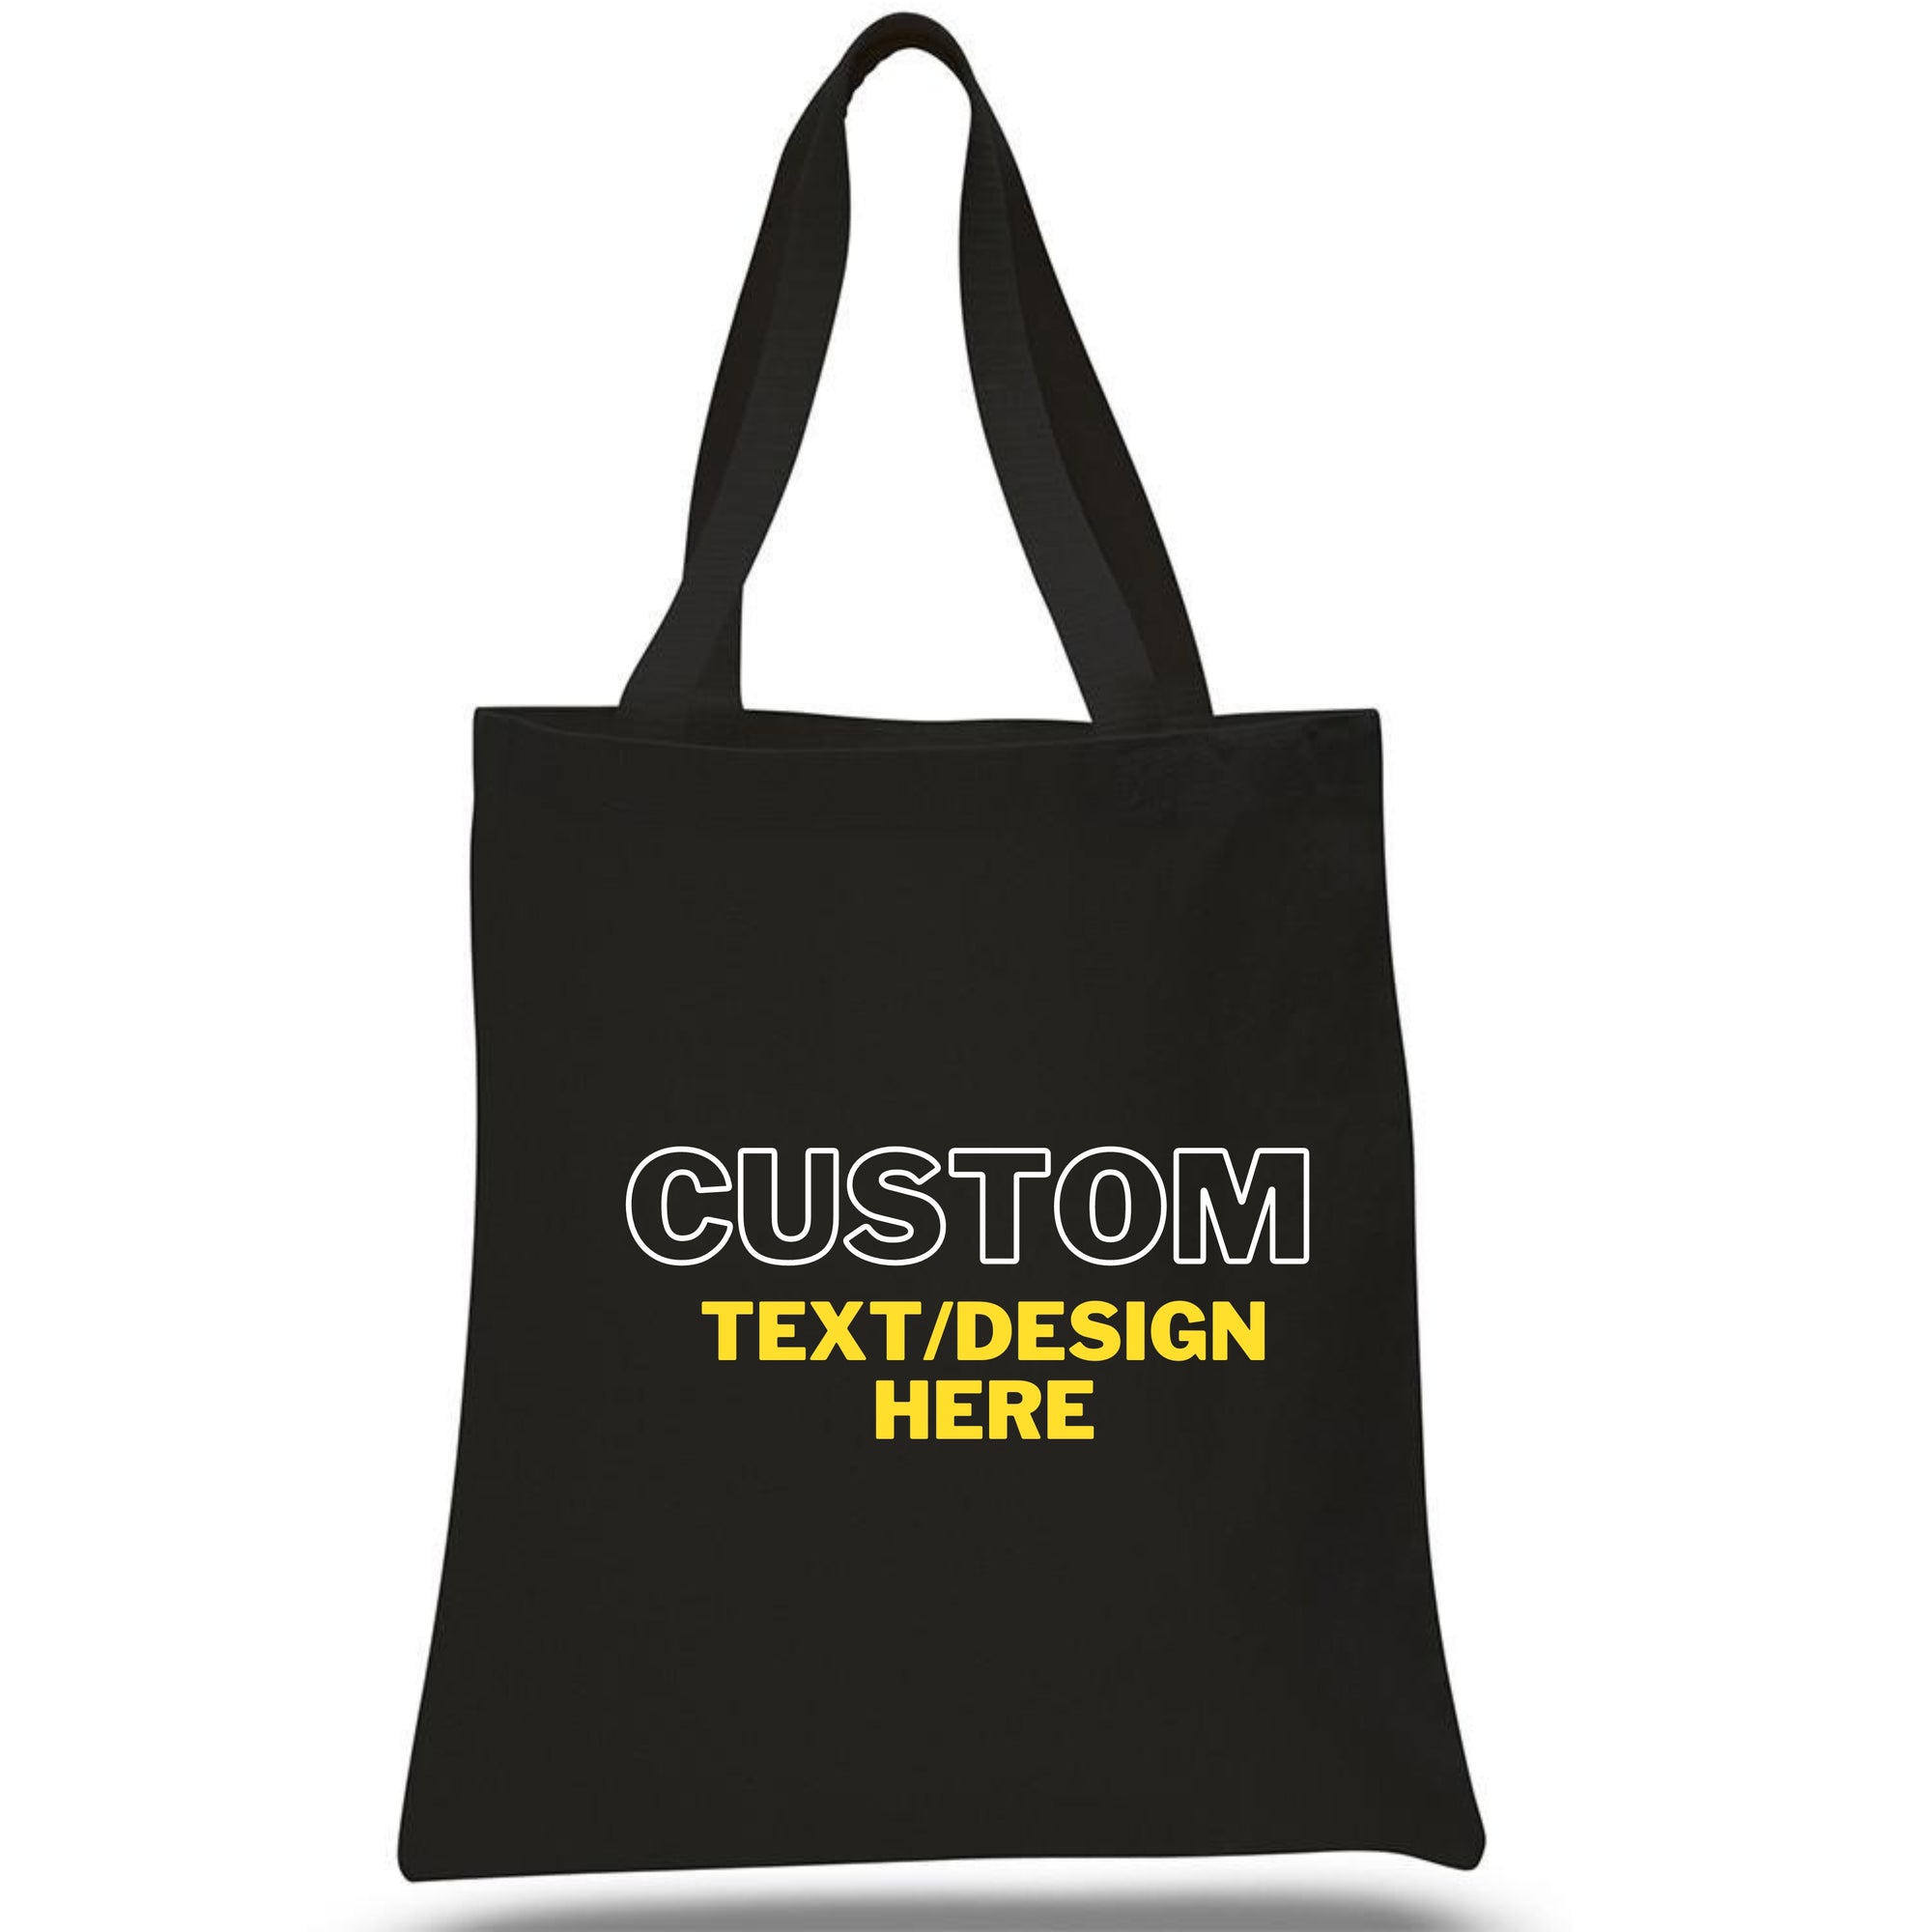 Personalize My Tote Bag